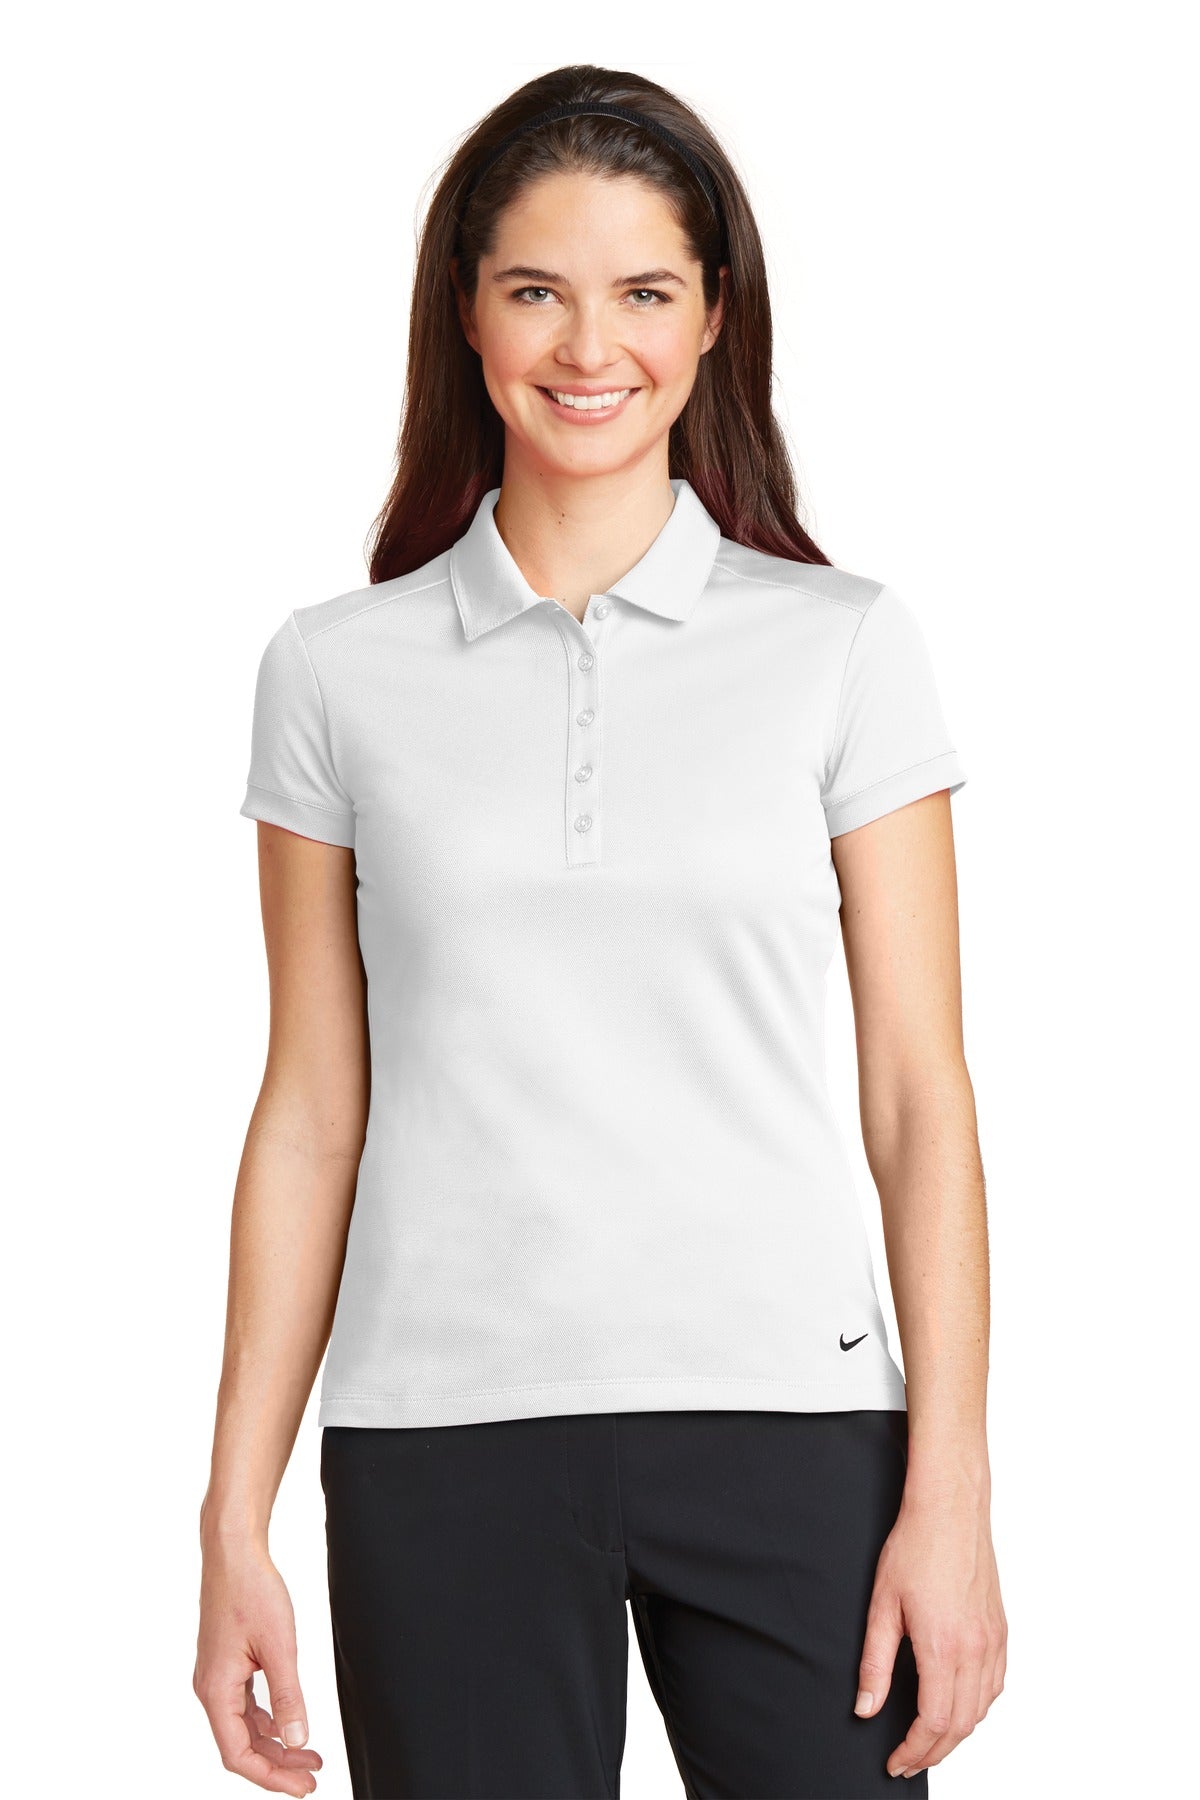 Nike Ladies Dri-FIT Solid Icon Pique Modern Fit Polo.  746100